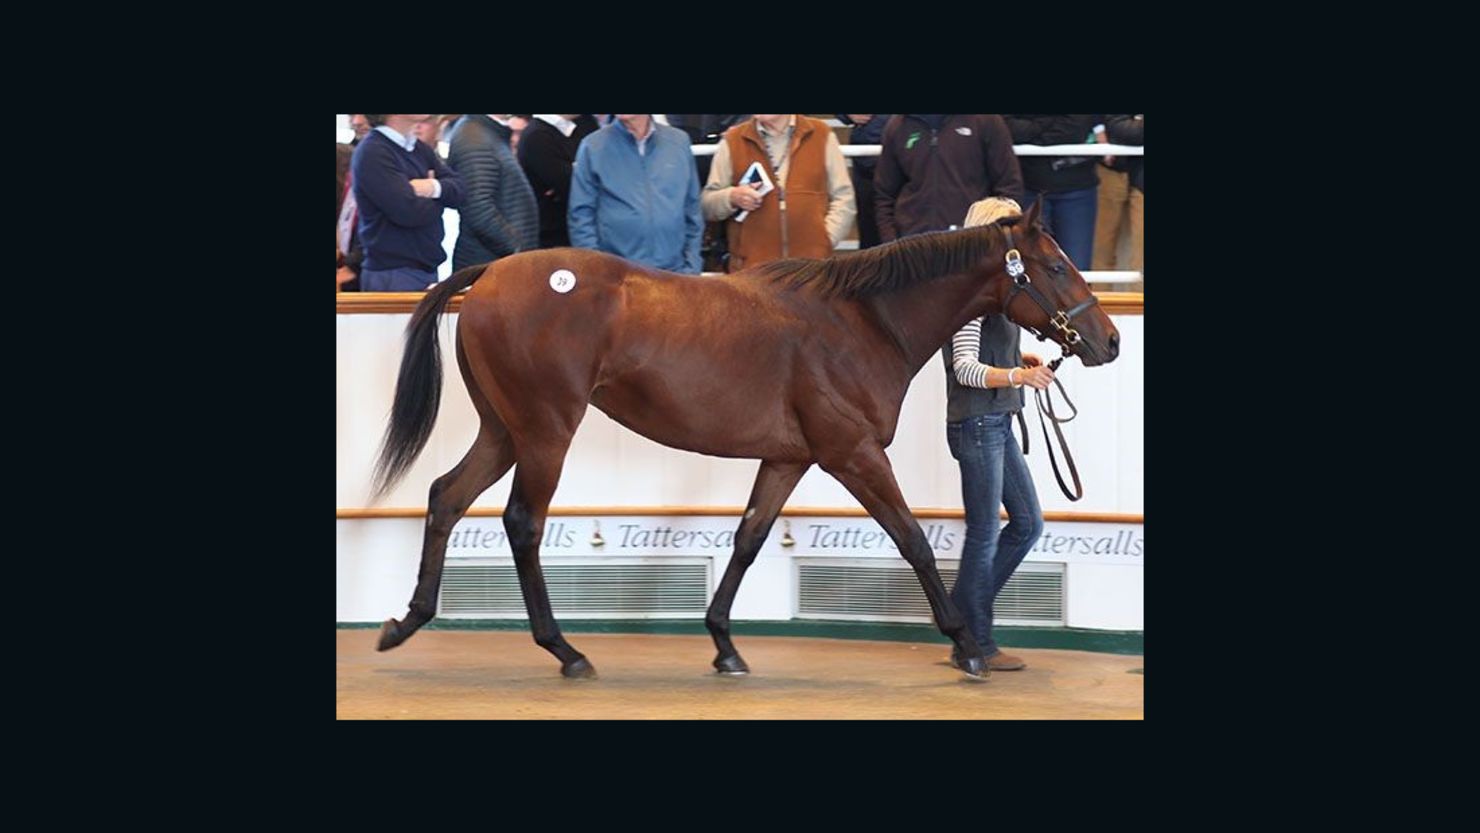 The colt out of Dubawi sold for 2.6m guineas at the Tattersalls October Yearling sales.